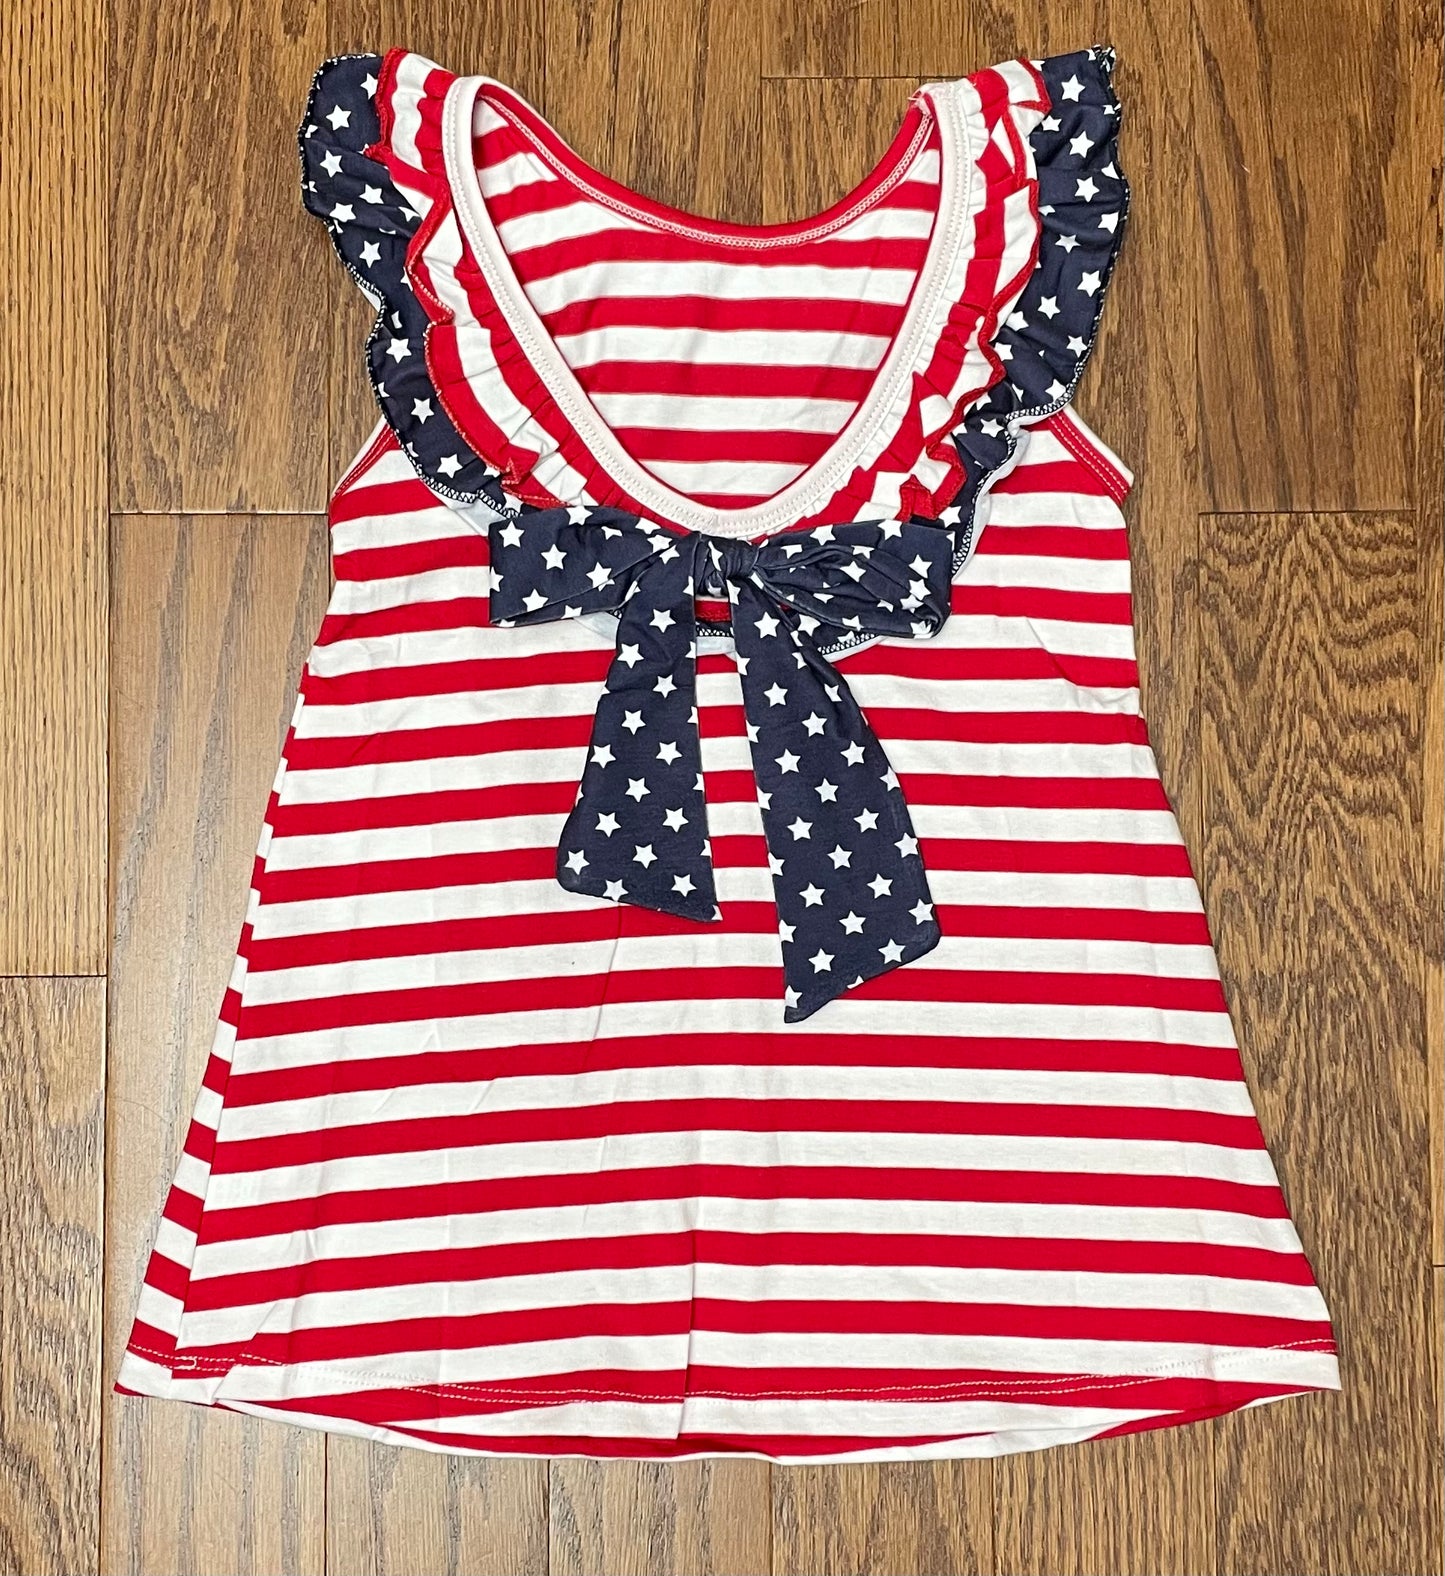 Red, White, and Blue Dress